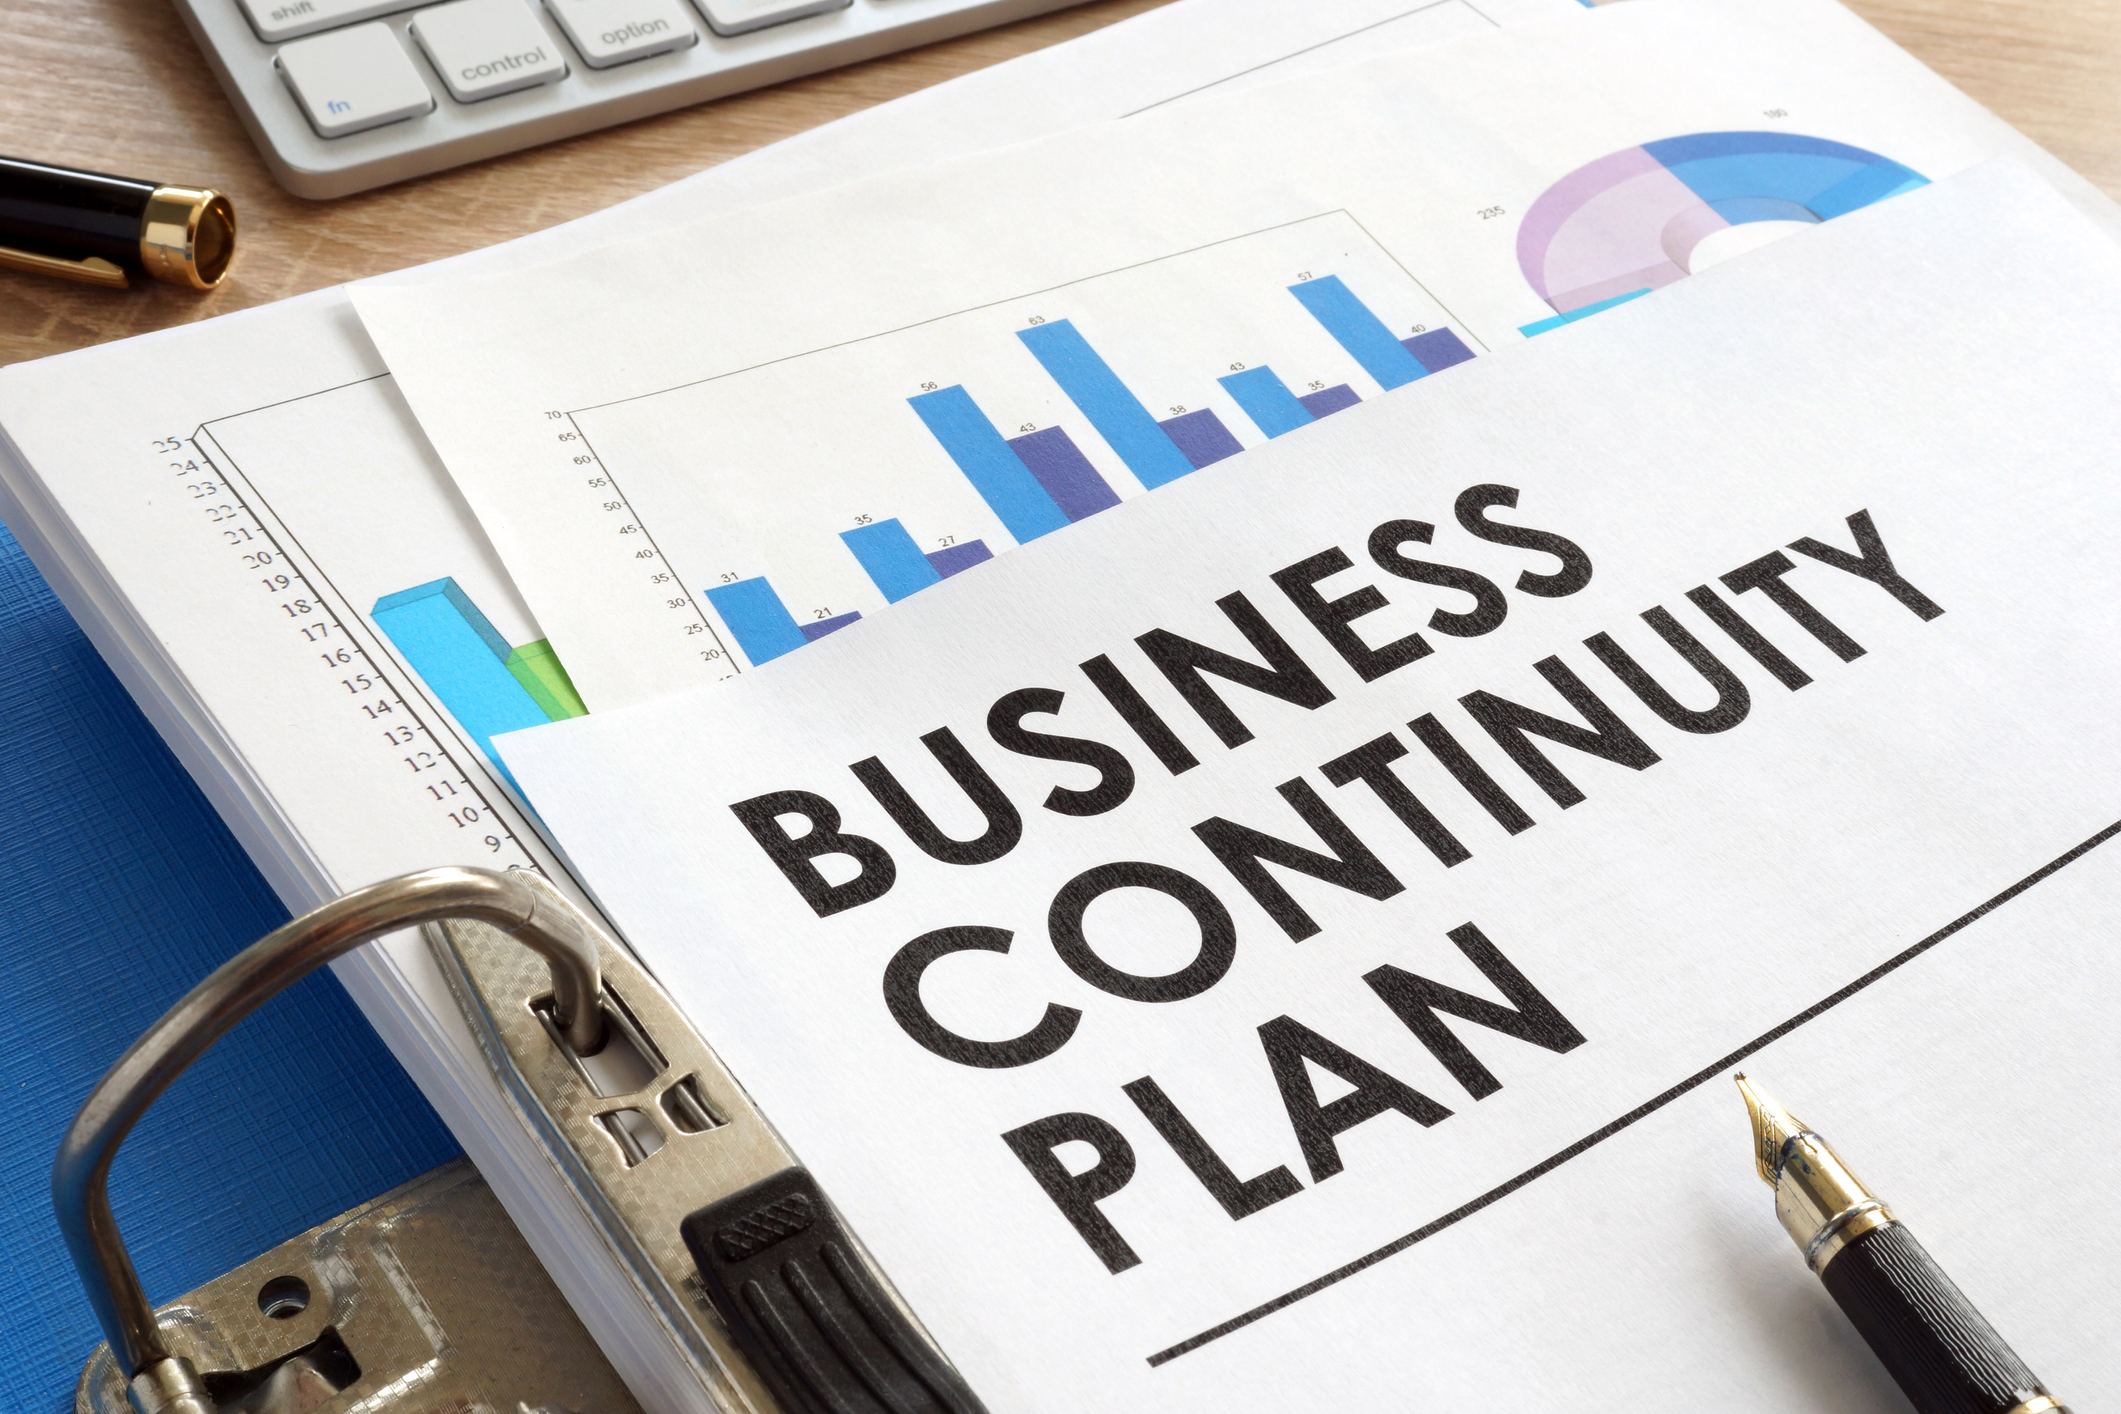 business continuity plans nhs